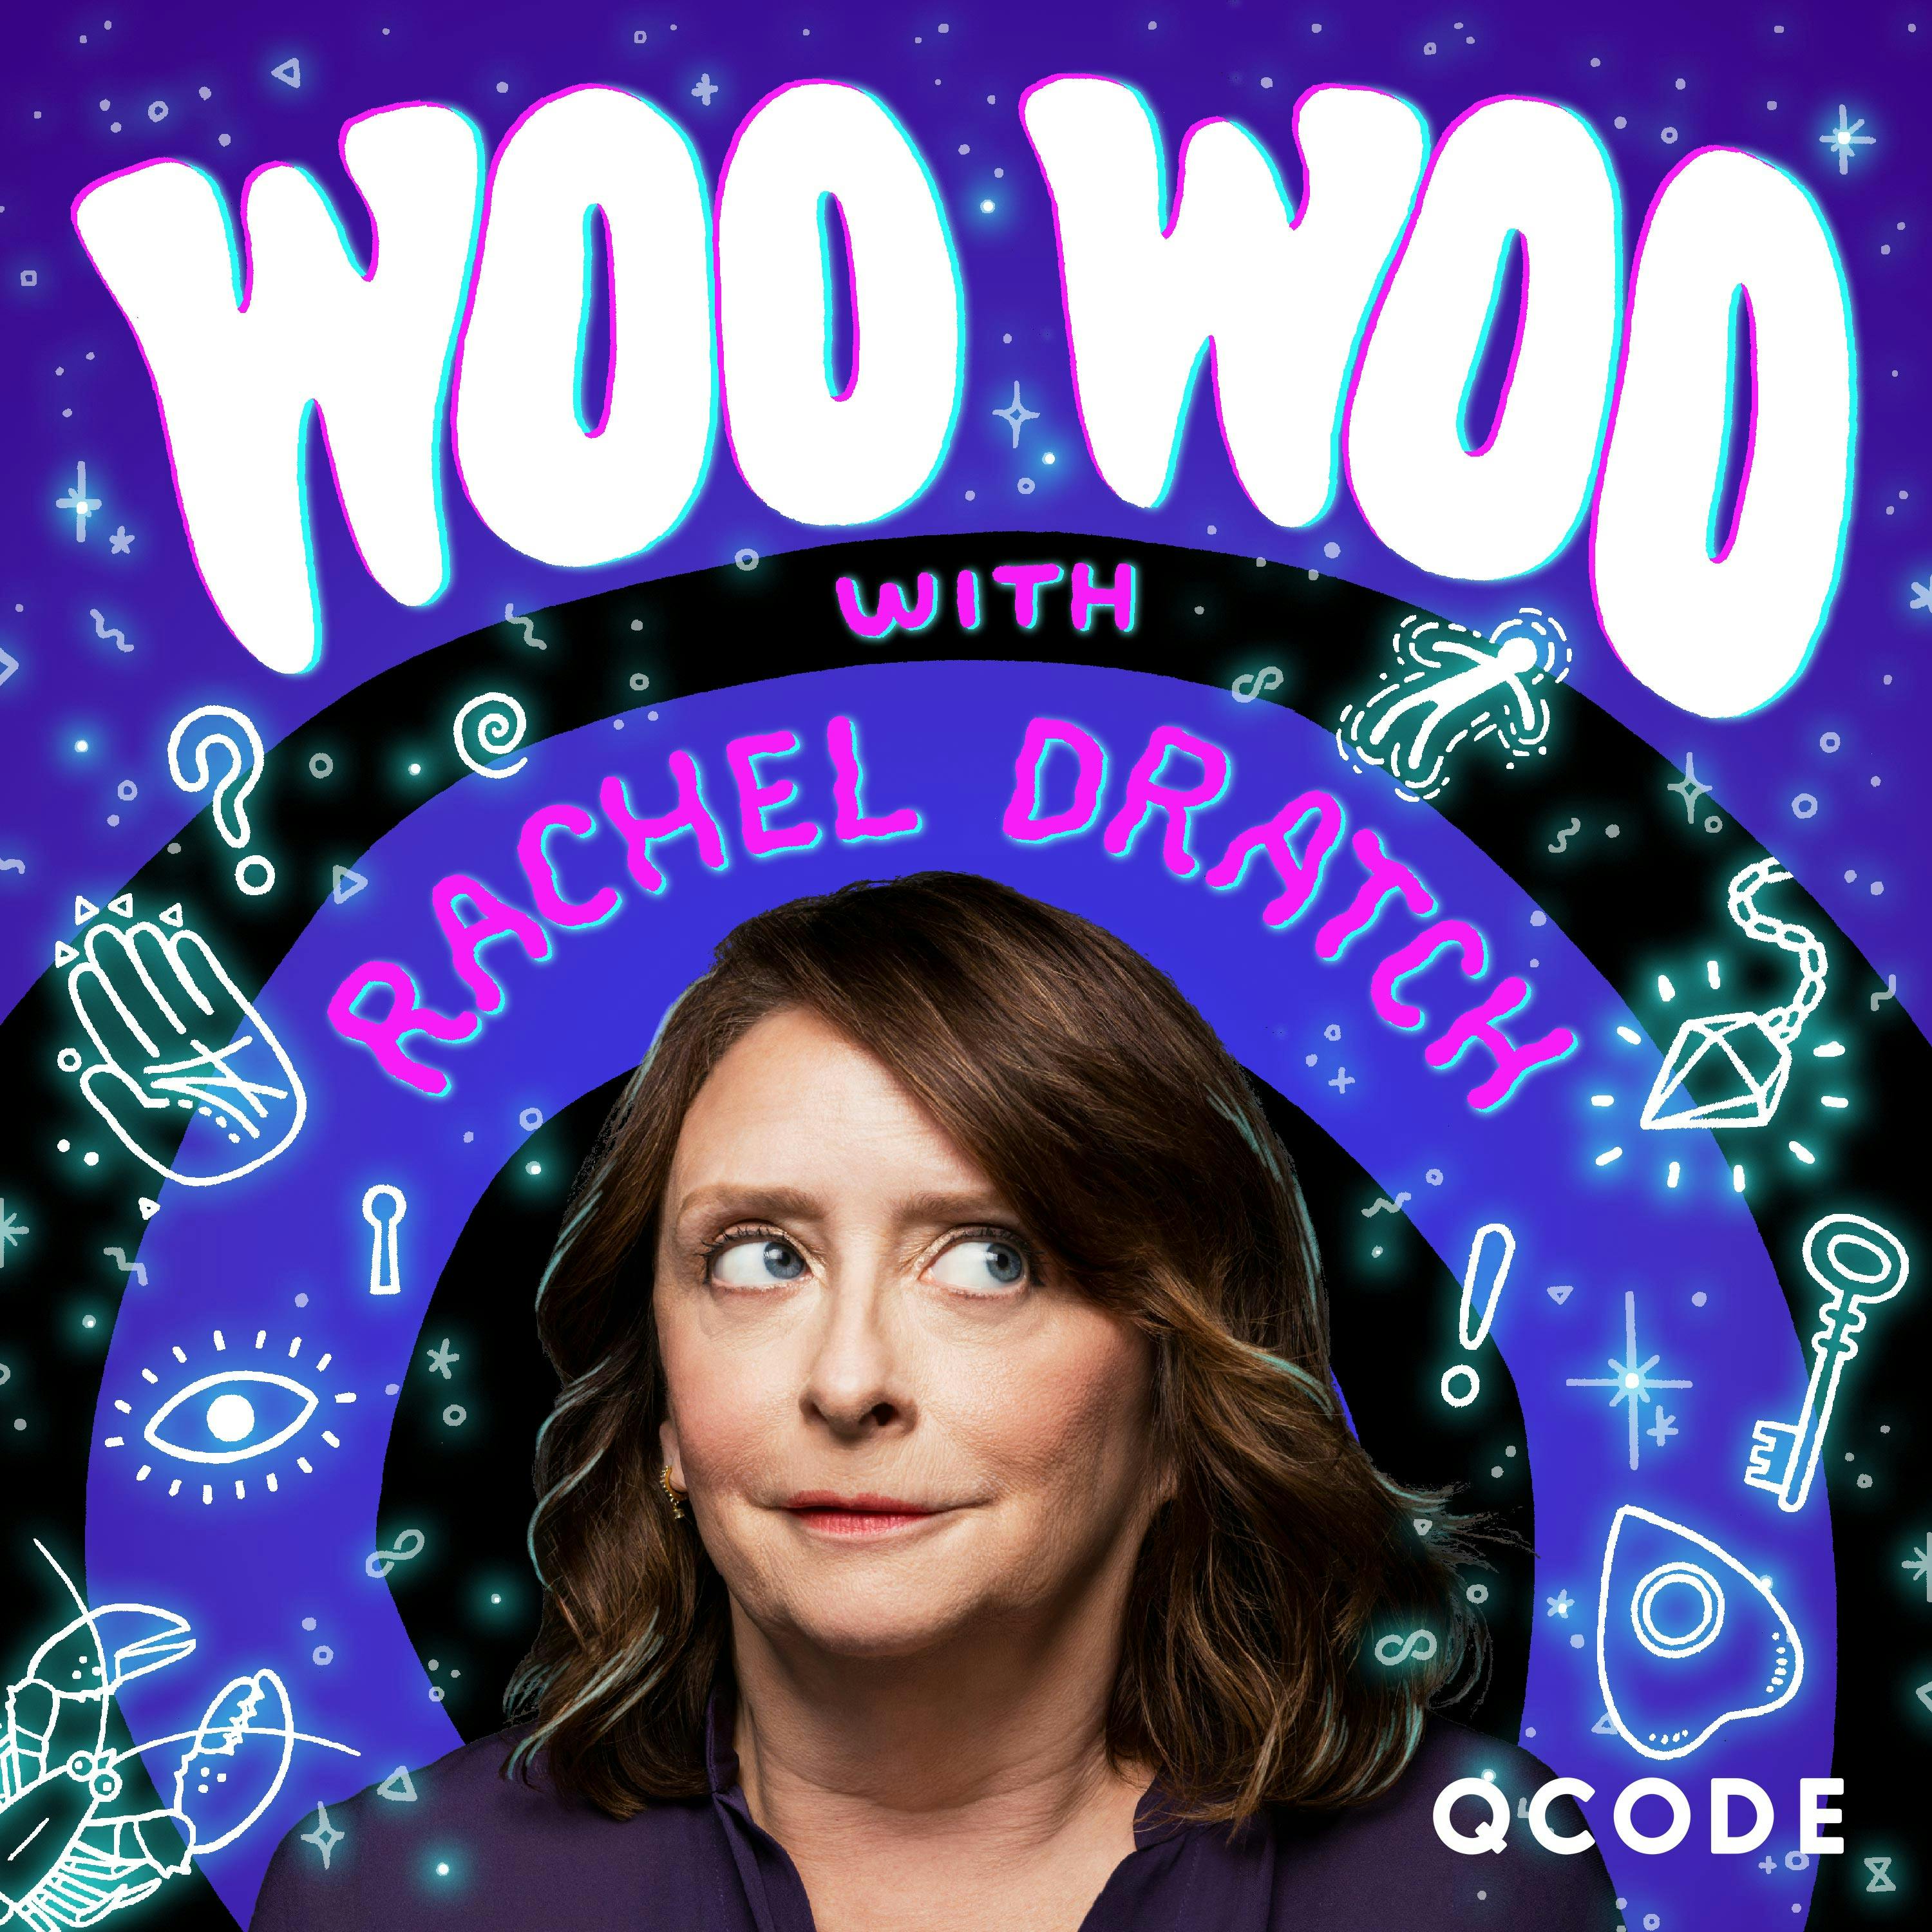 Woo Woo with Rachel Dratch podcast show image